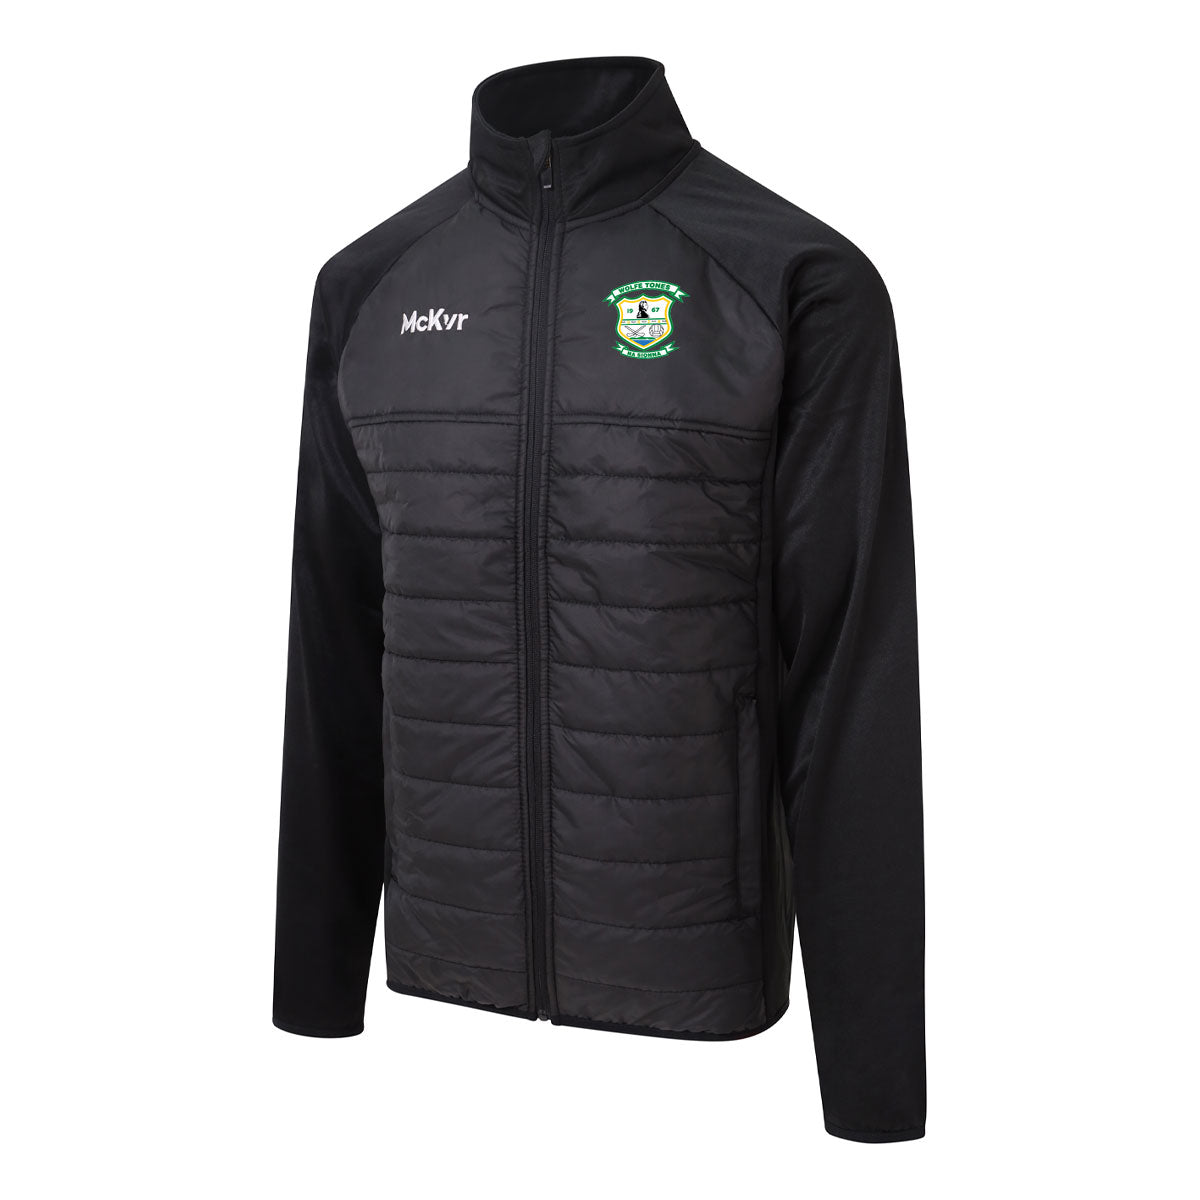 Mc Keever Wolfe Tones Na Sionna, Clare Core 22 Hybrid Jacket - Adult - Black